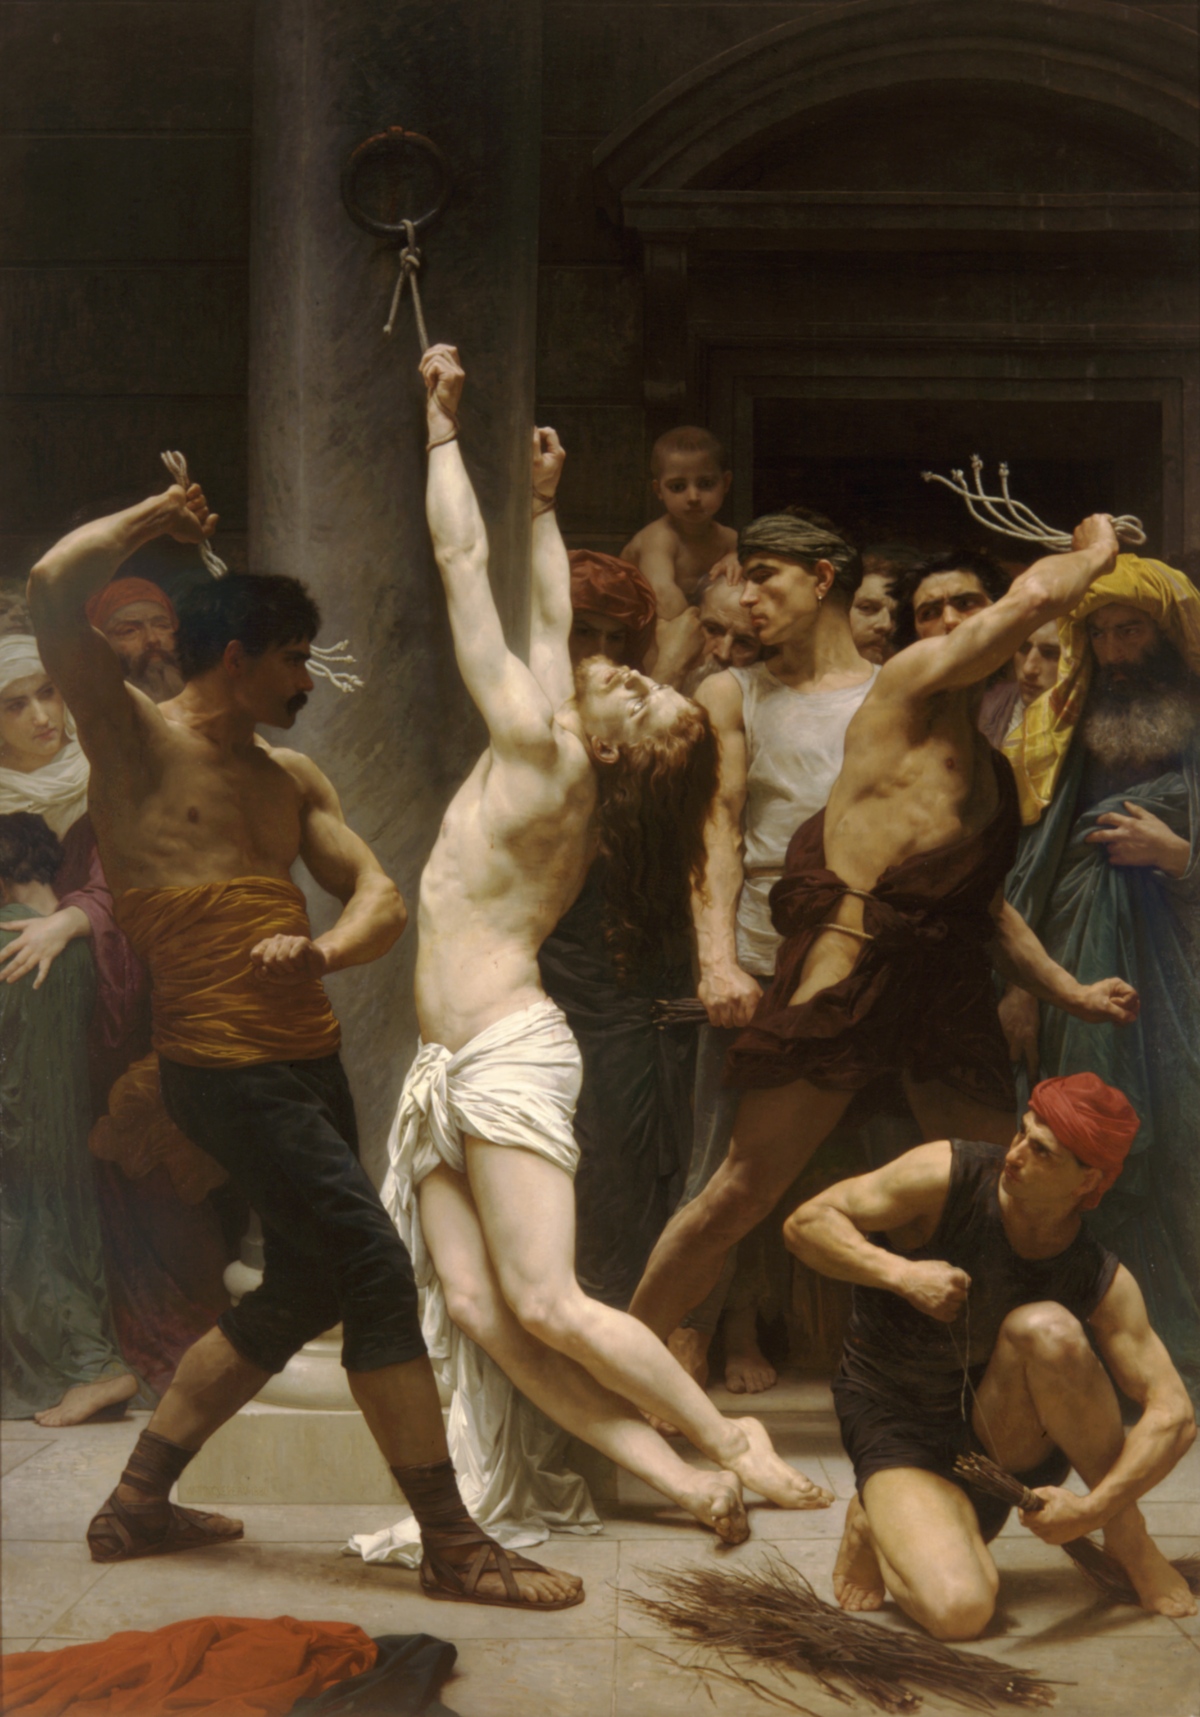 William-Adolphe Bouguereau (1825-1905), “The Flagellation of Our Lord Jesus Christ” (1880) 